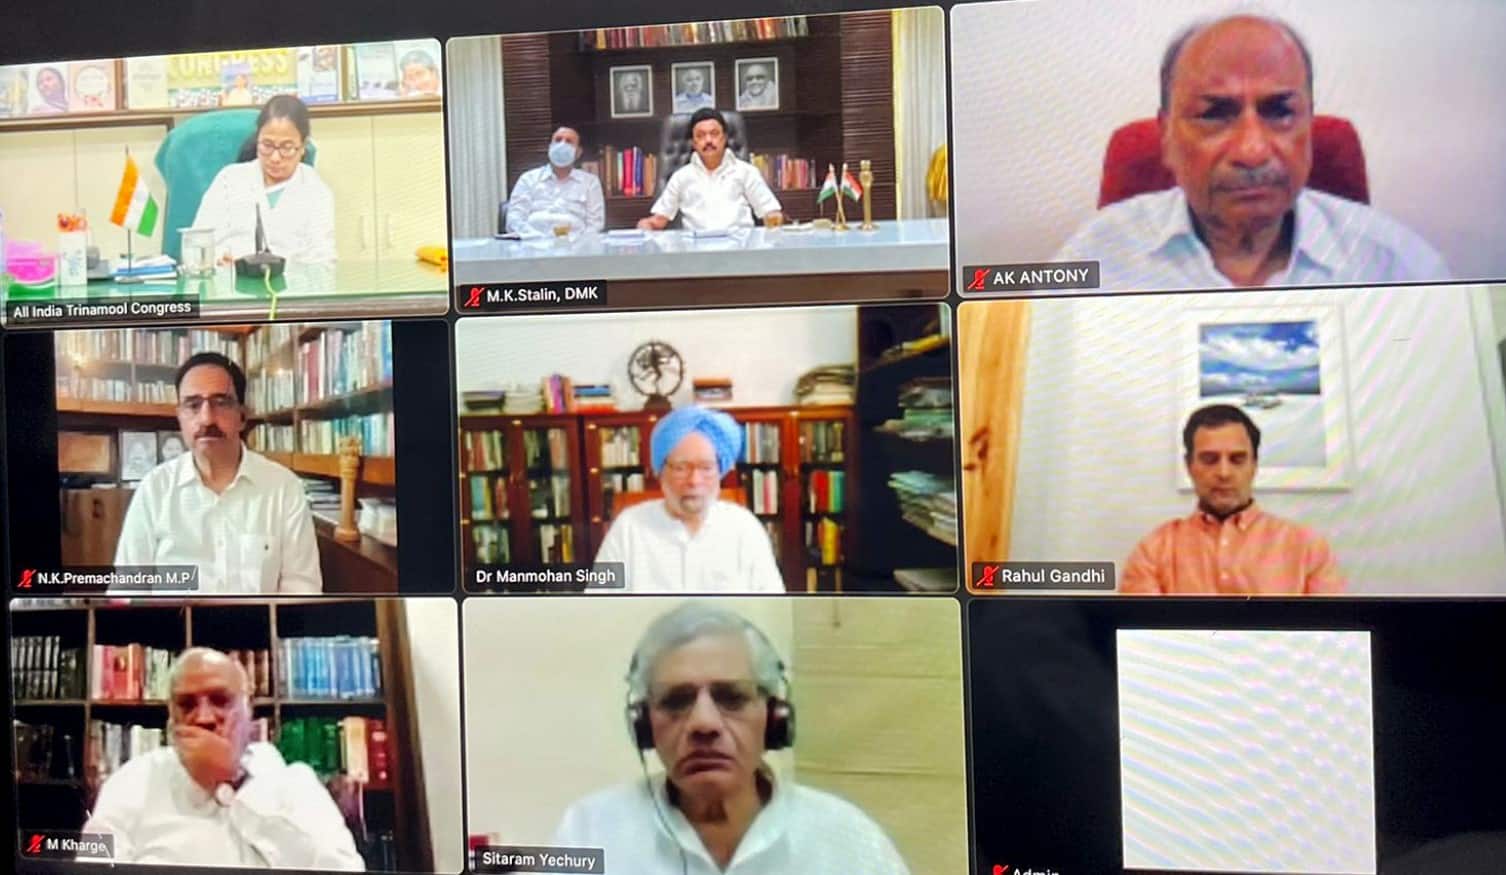 Leaders of 19 Opposition parties meet virtually, make 11 demands including SC-monitored probe into use of Pegasus